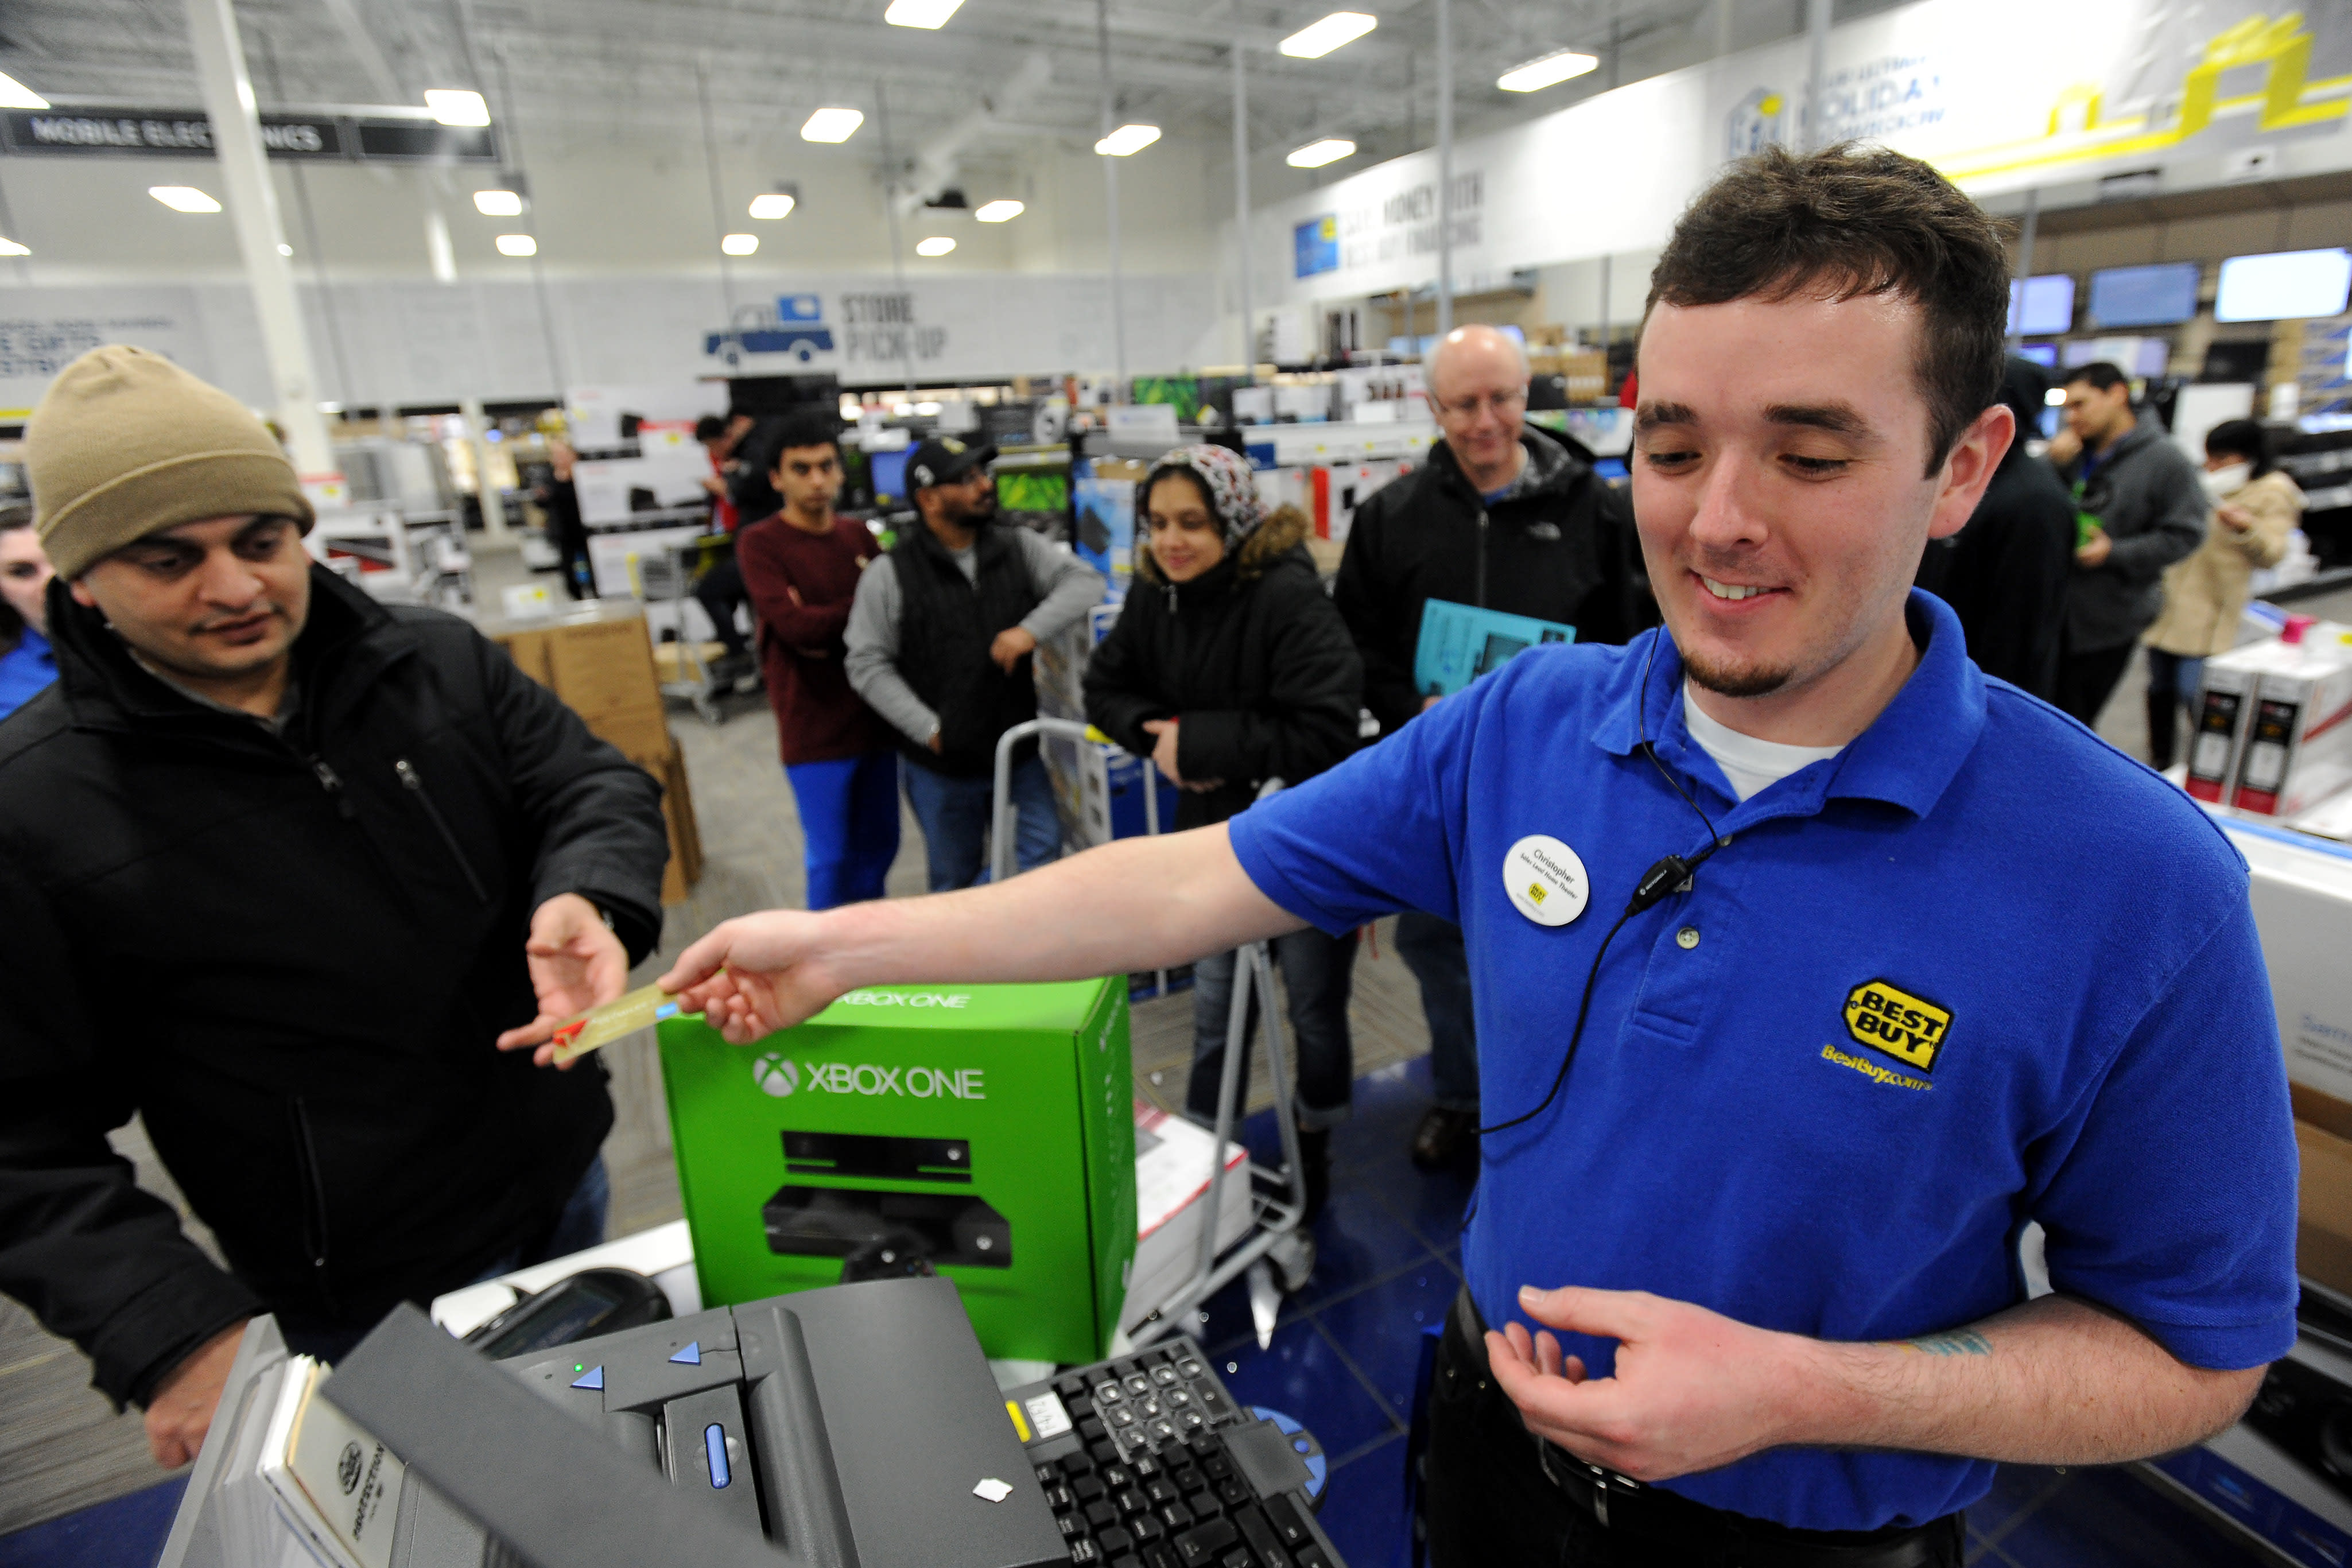 Best buy founder dick schulze says goodbye, this is a very big deal